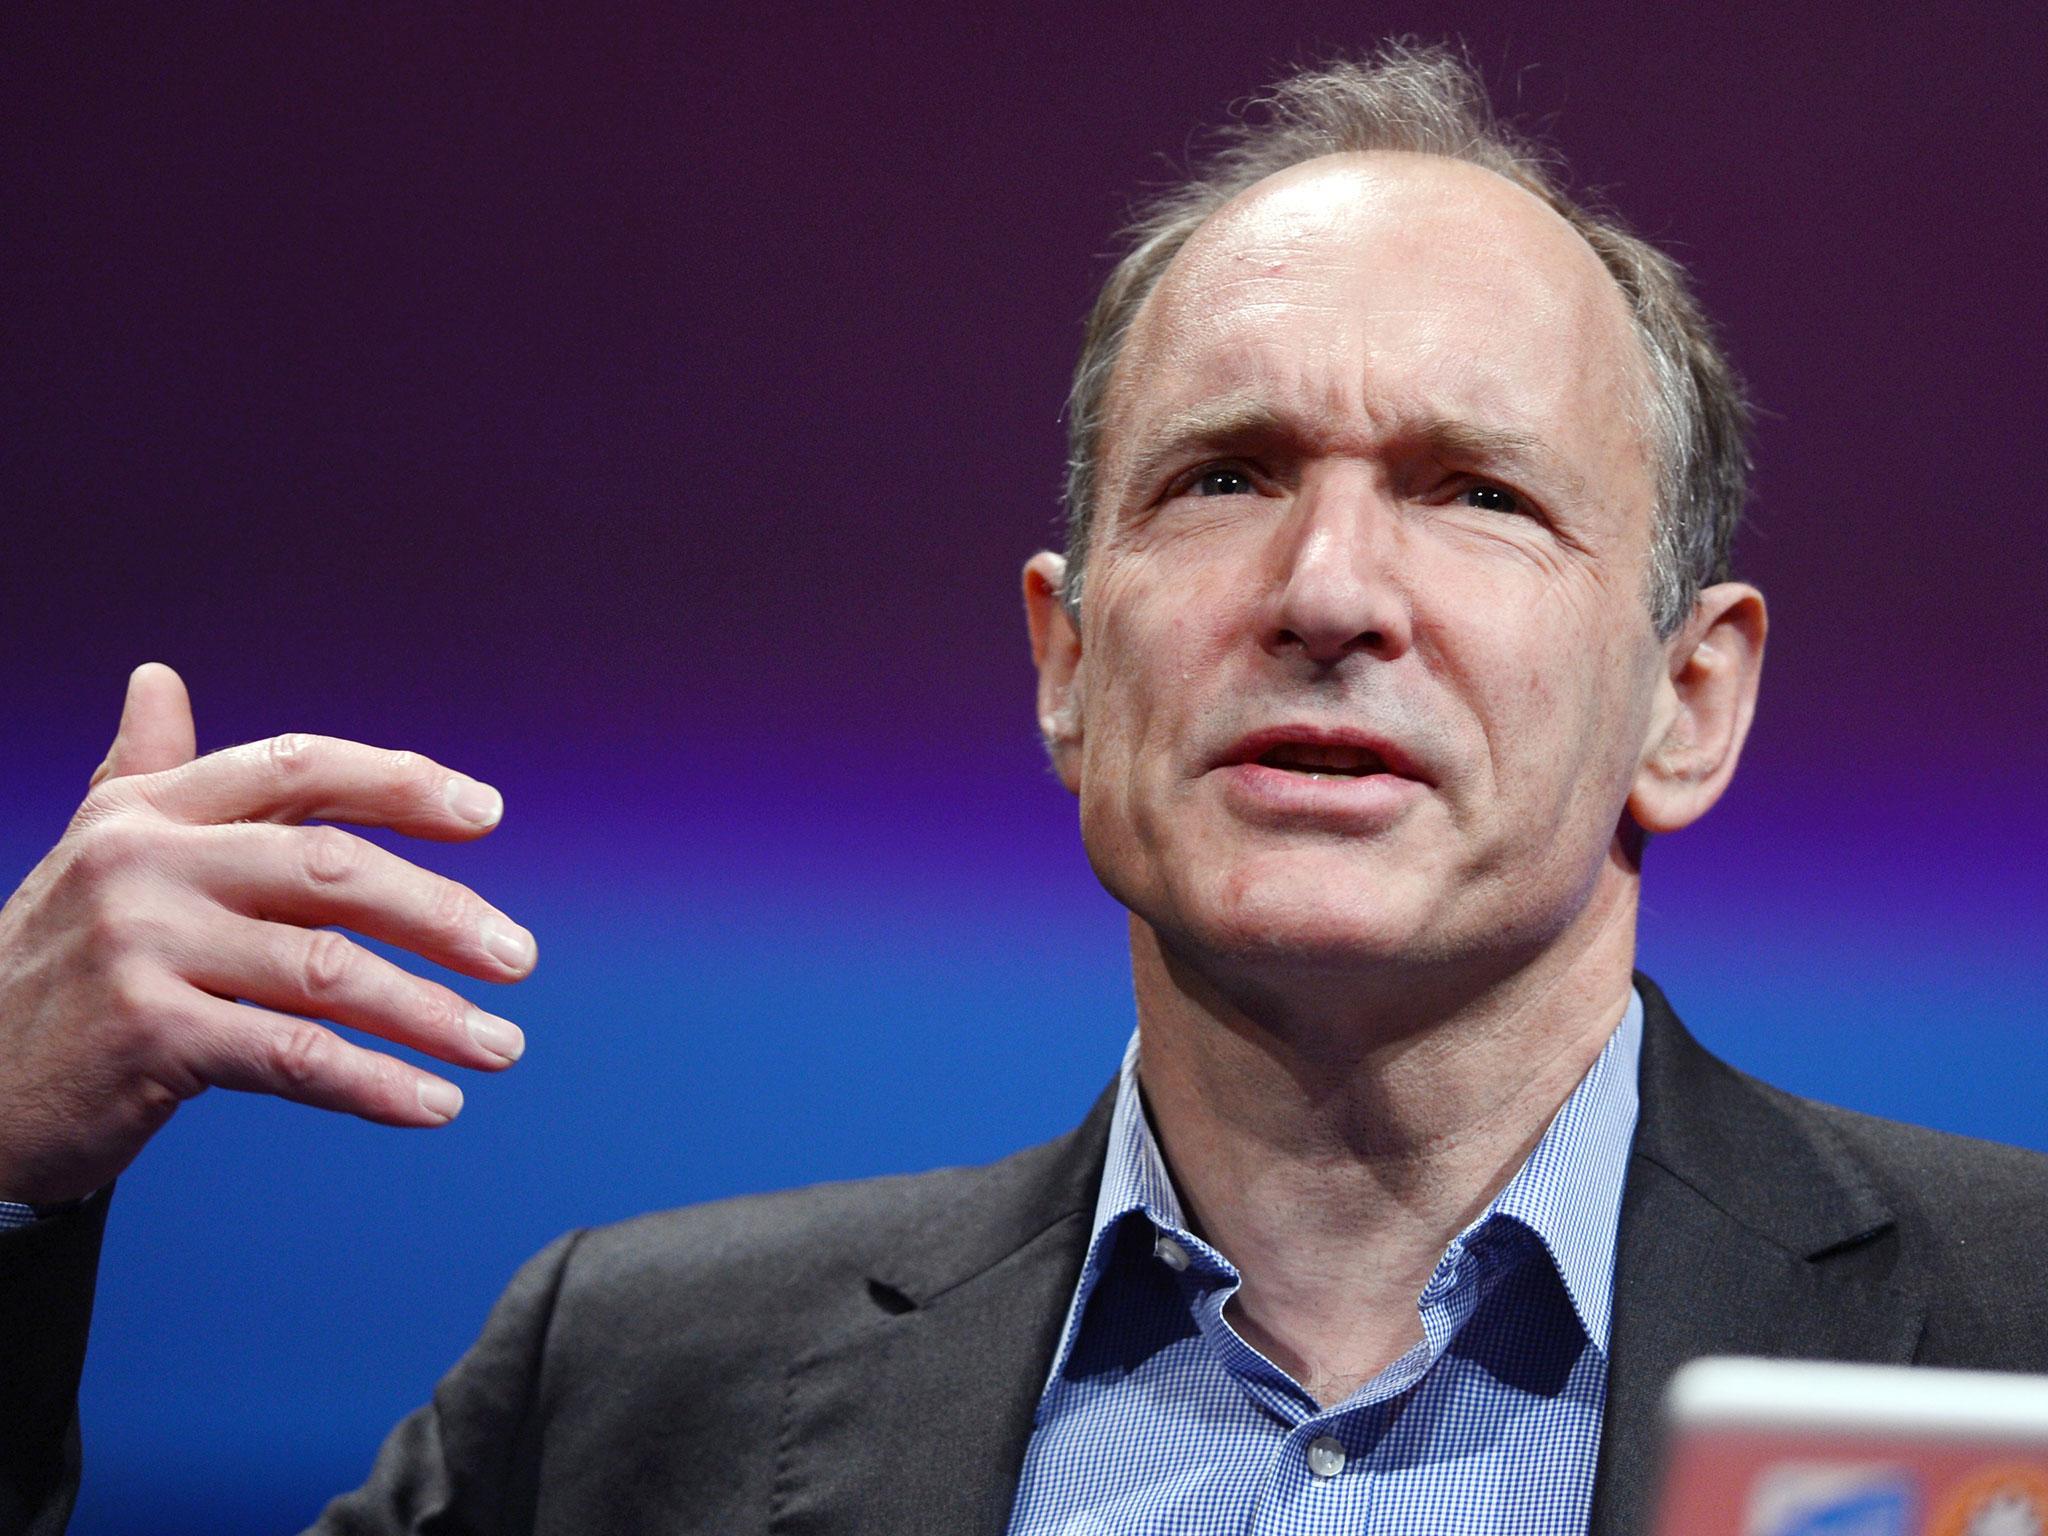 Inventor Of World Wide Web Sir Tim Berners Lee Calls For Crackdown On Fake News The Independent The Independent